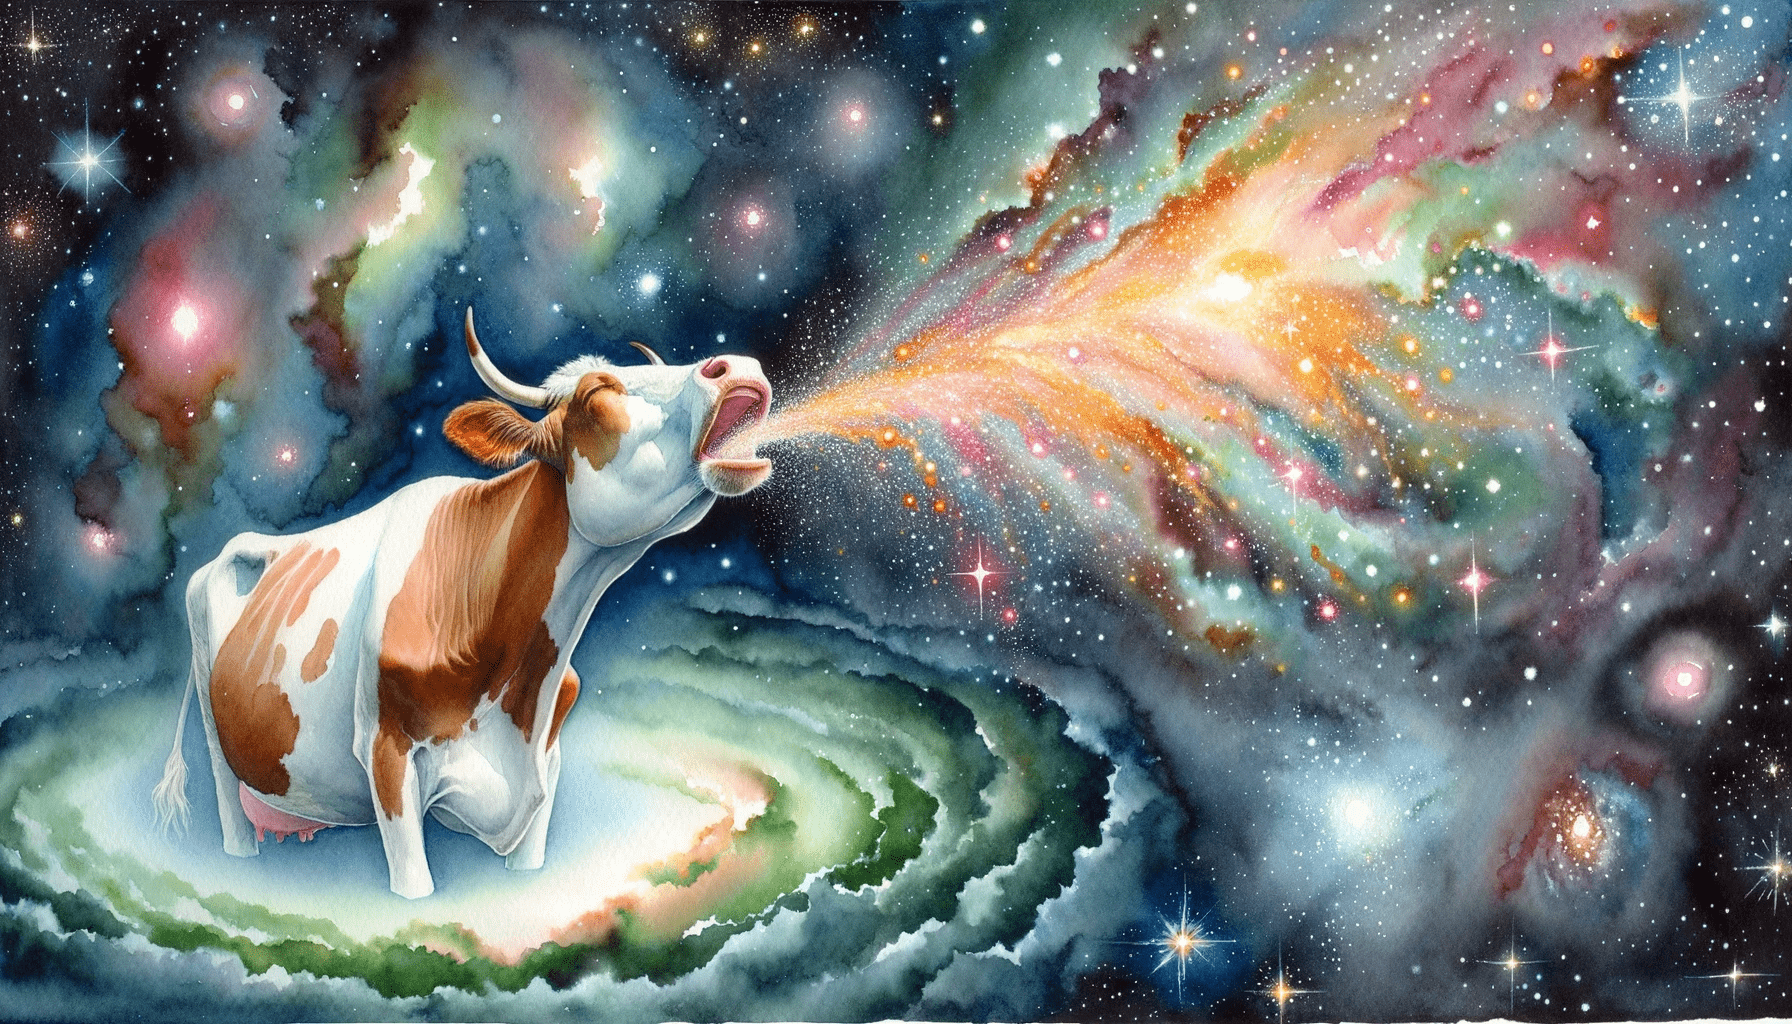 Within the profound expanse of the cosmos, a cow contentedly feeds on the gleaming fibers of the Milky Way.